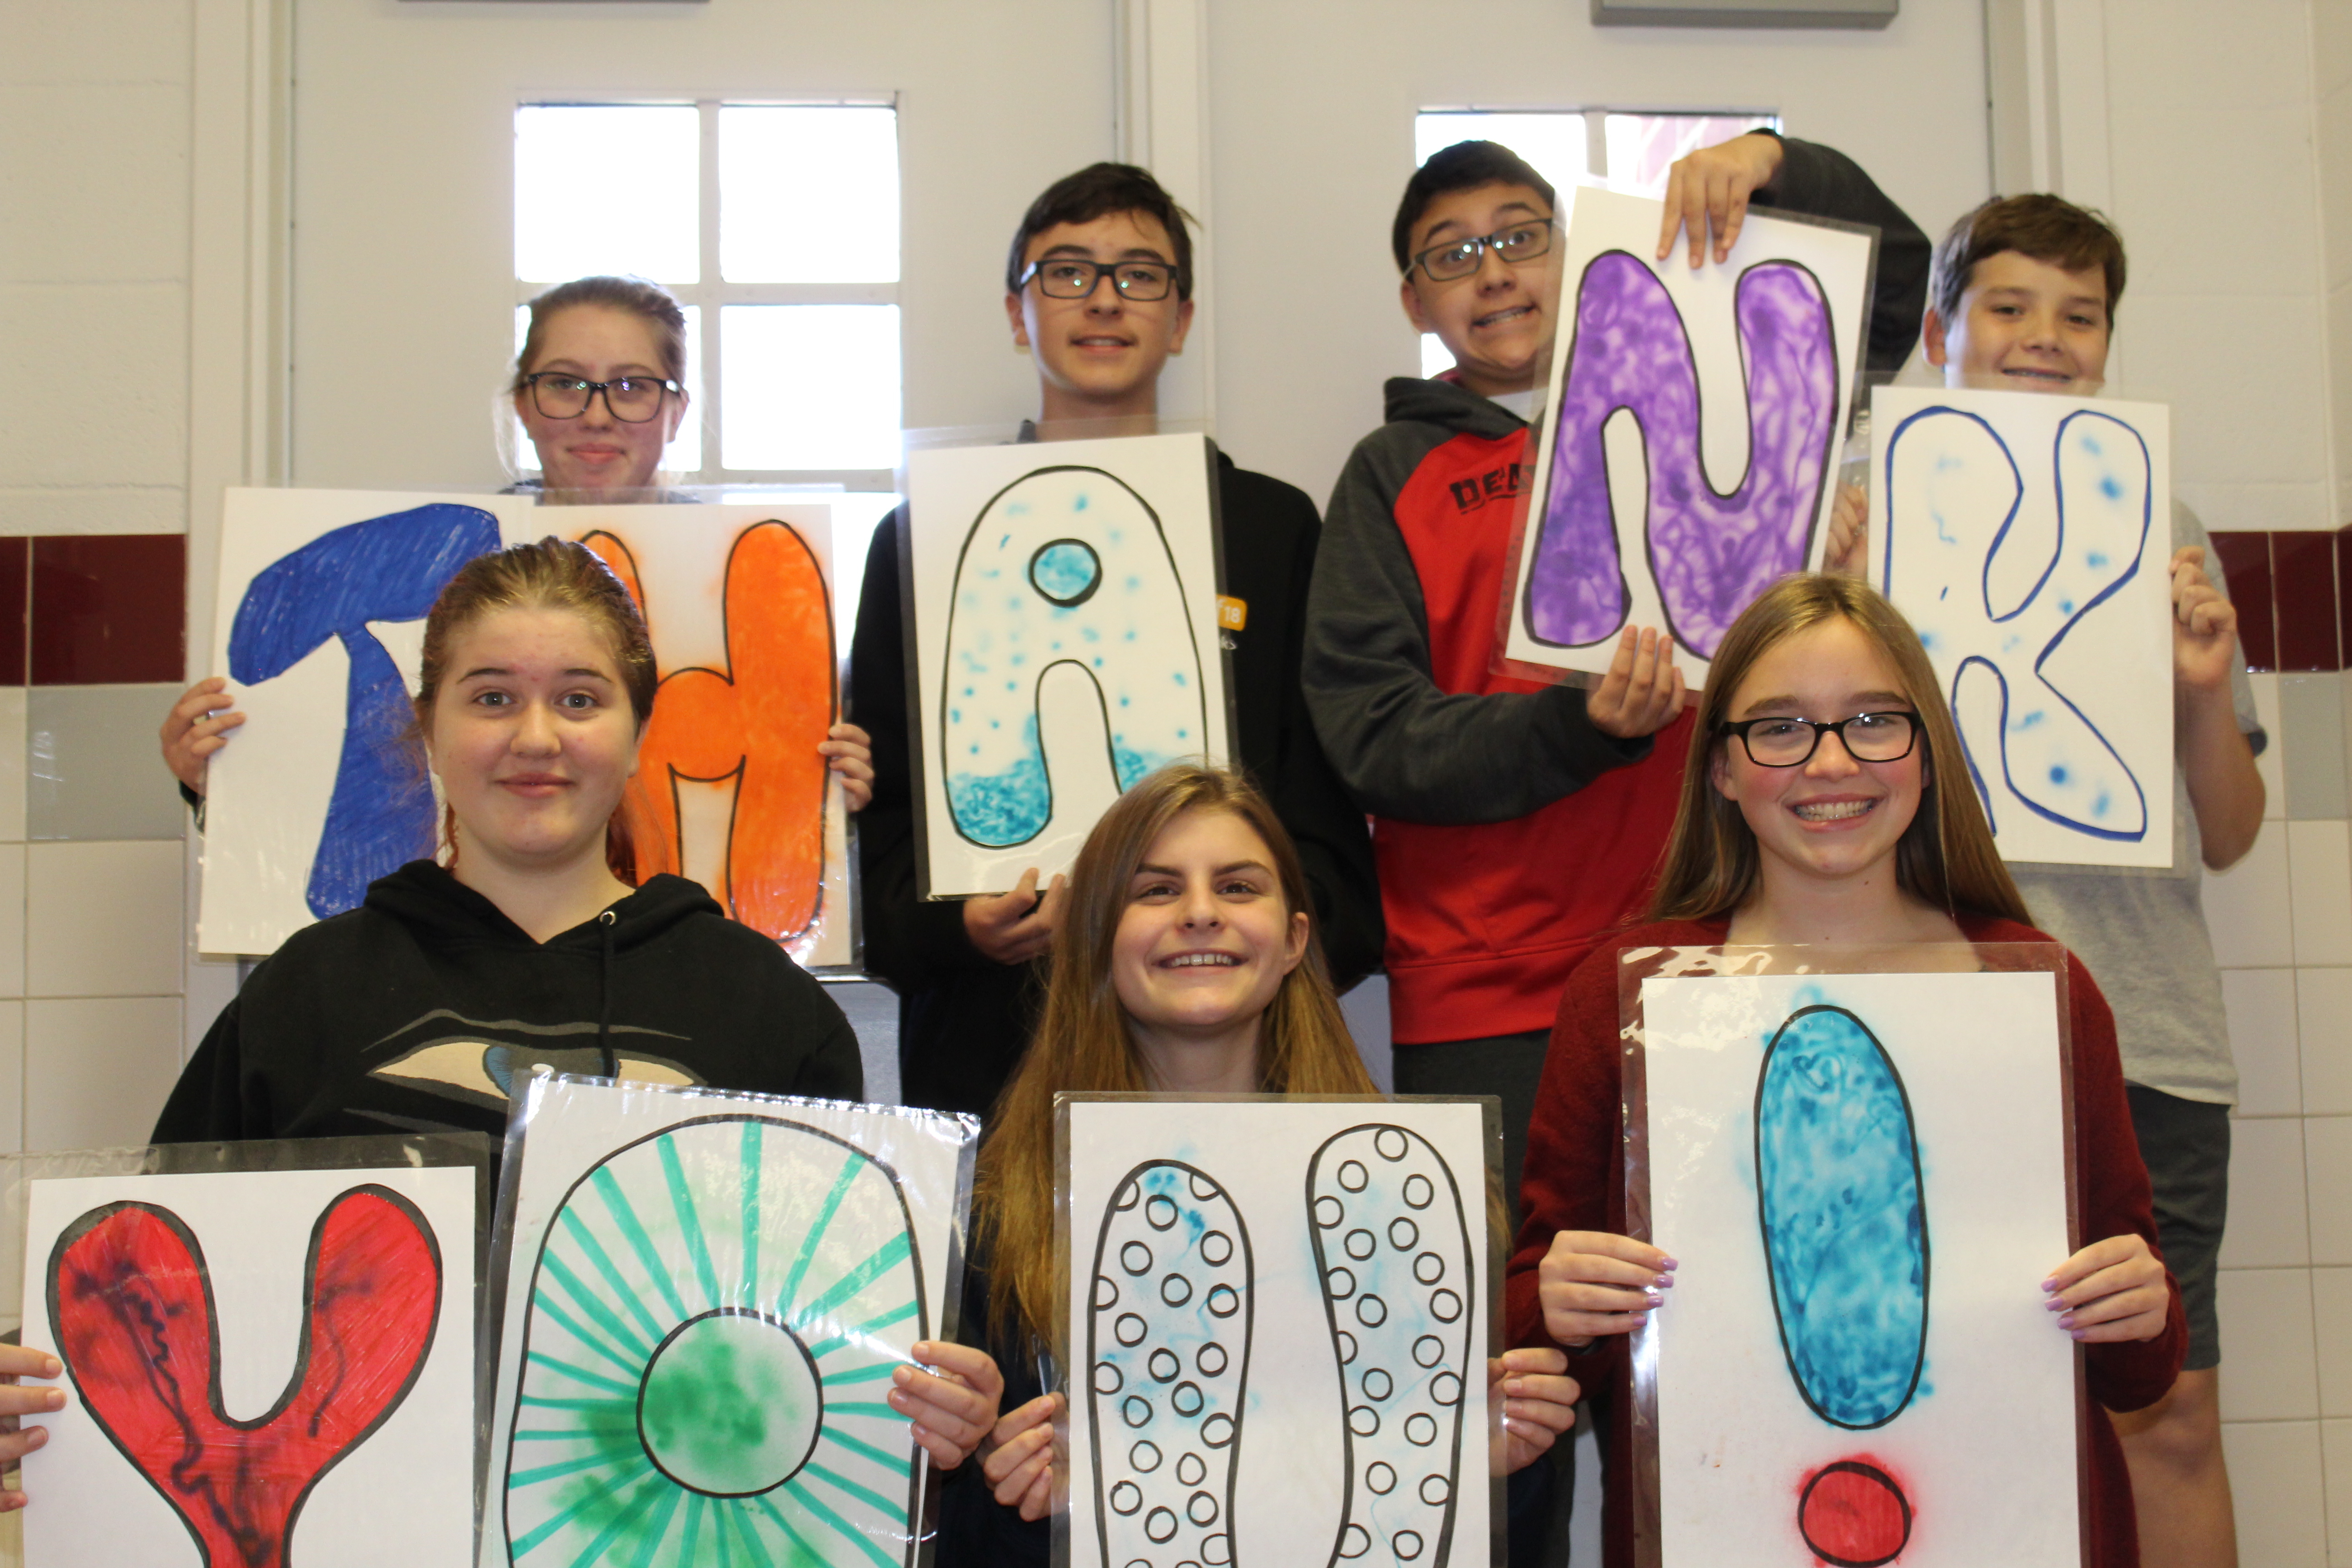 Your donation makes a difference! A $100 donation to Morven Park's Center for Civic Impact allows the team to digitally recreate the 12th grade lesson Agenda Setters in order to reach a wider audience.